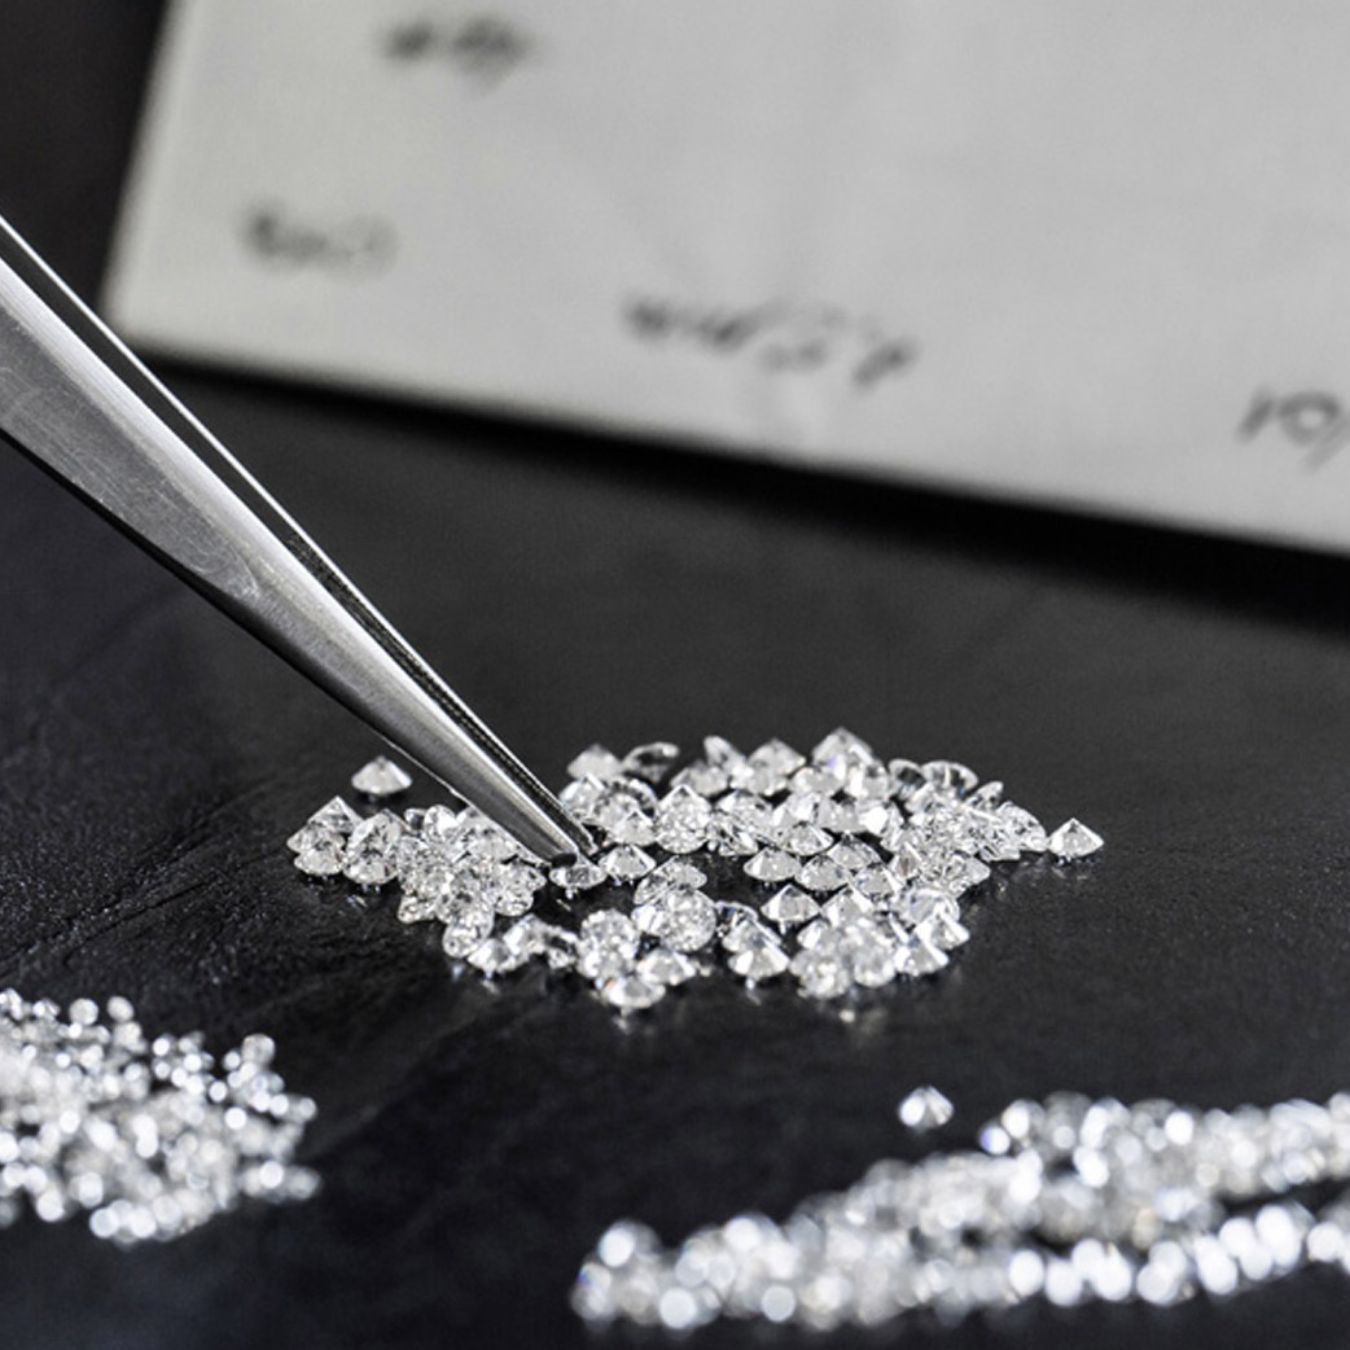 What to consider before investing in diamonds